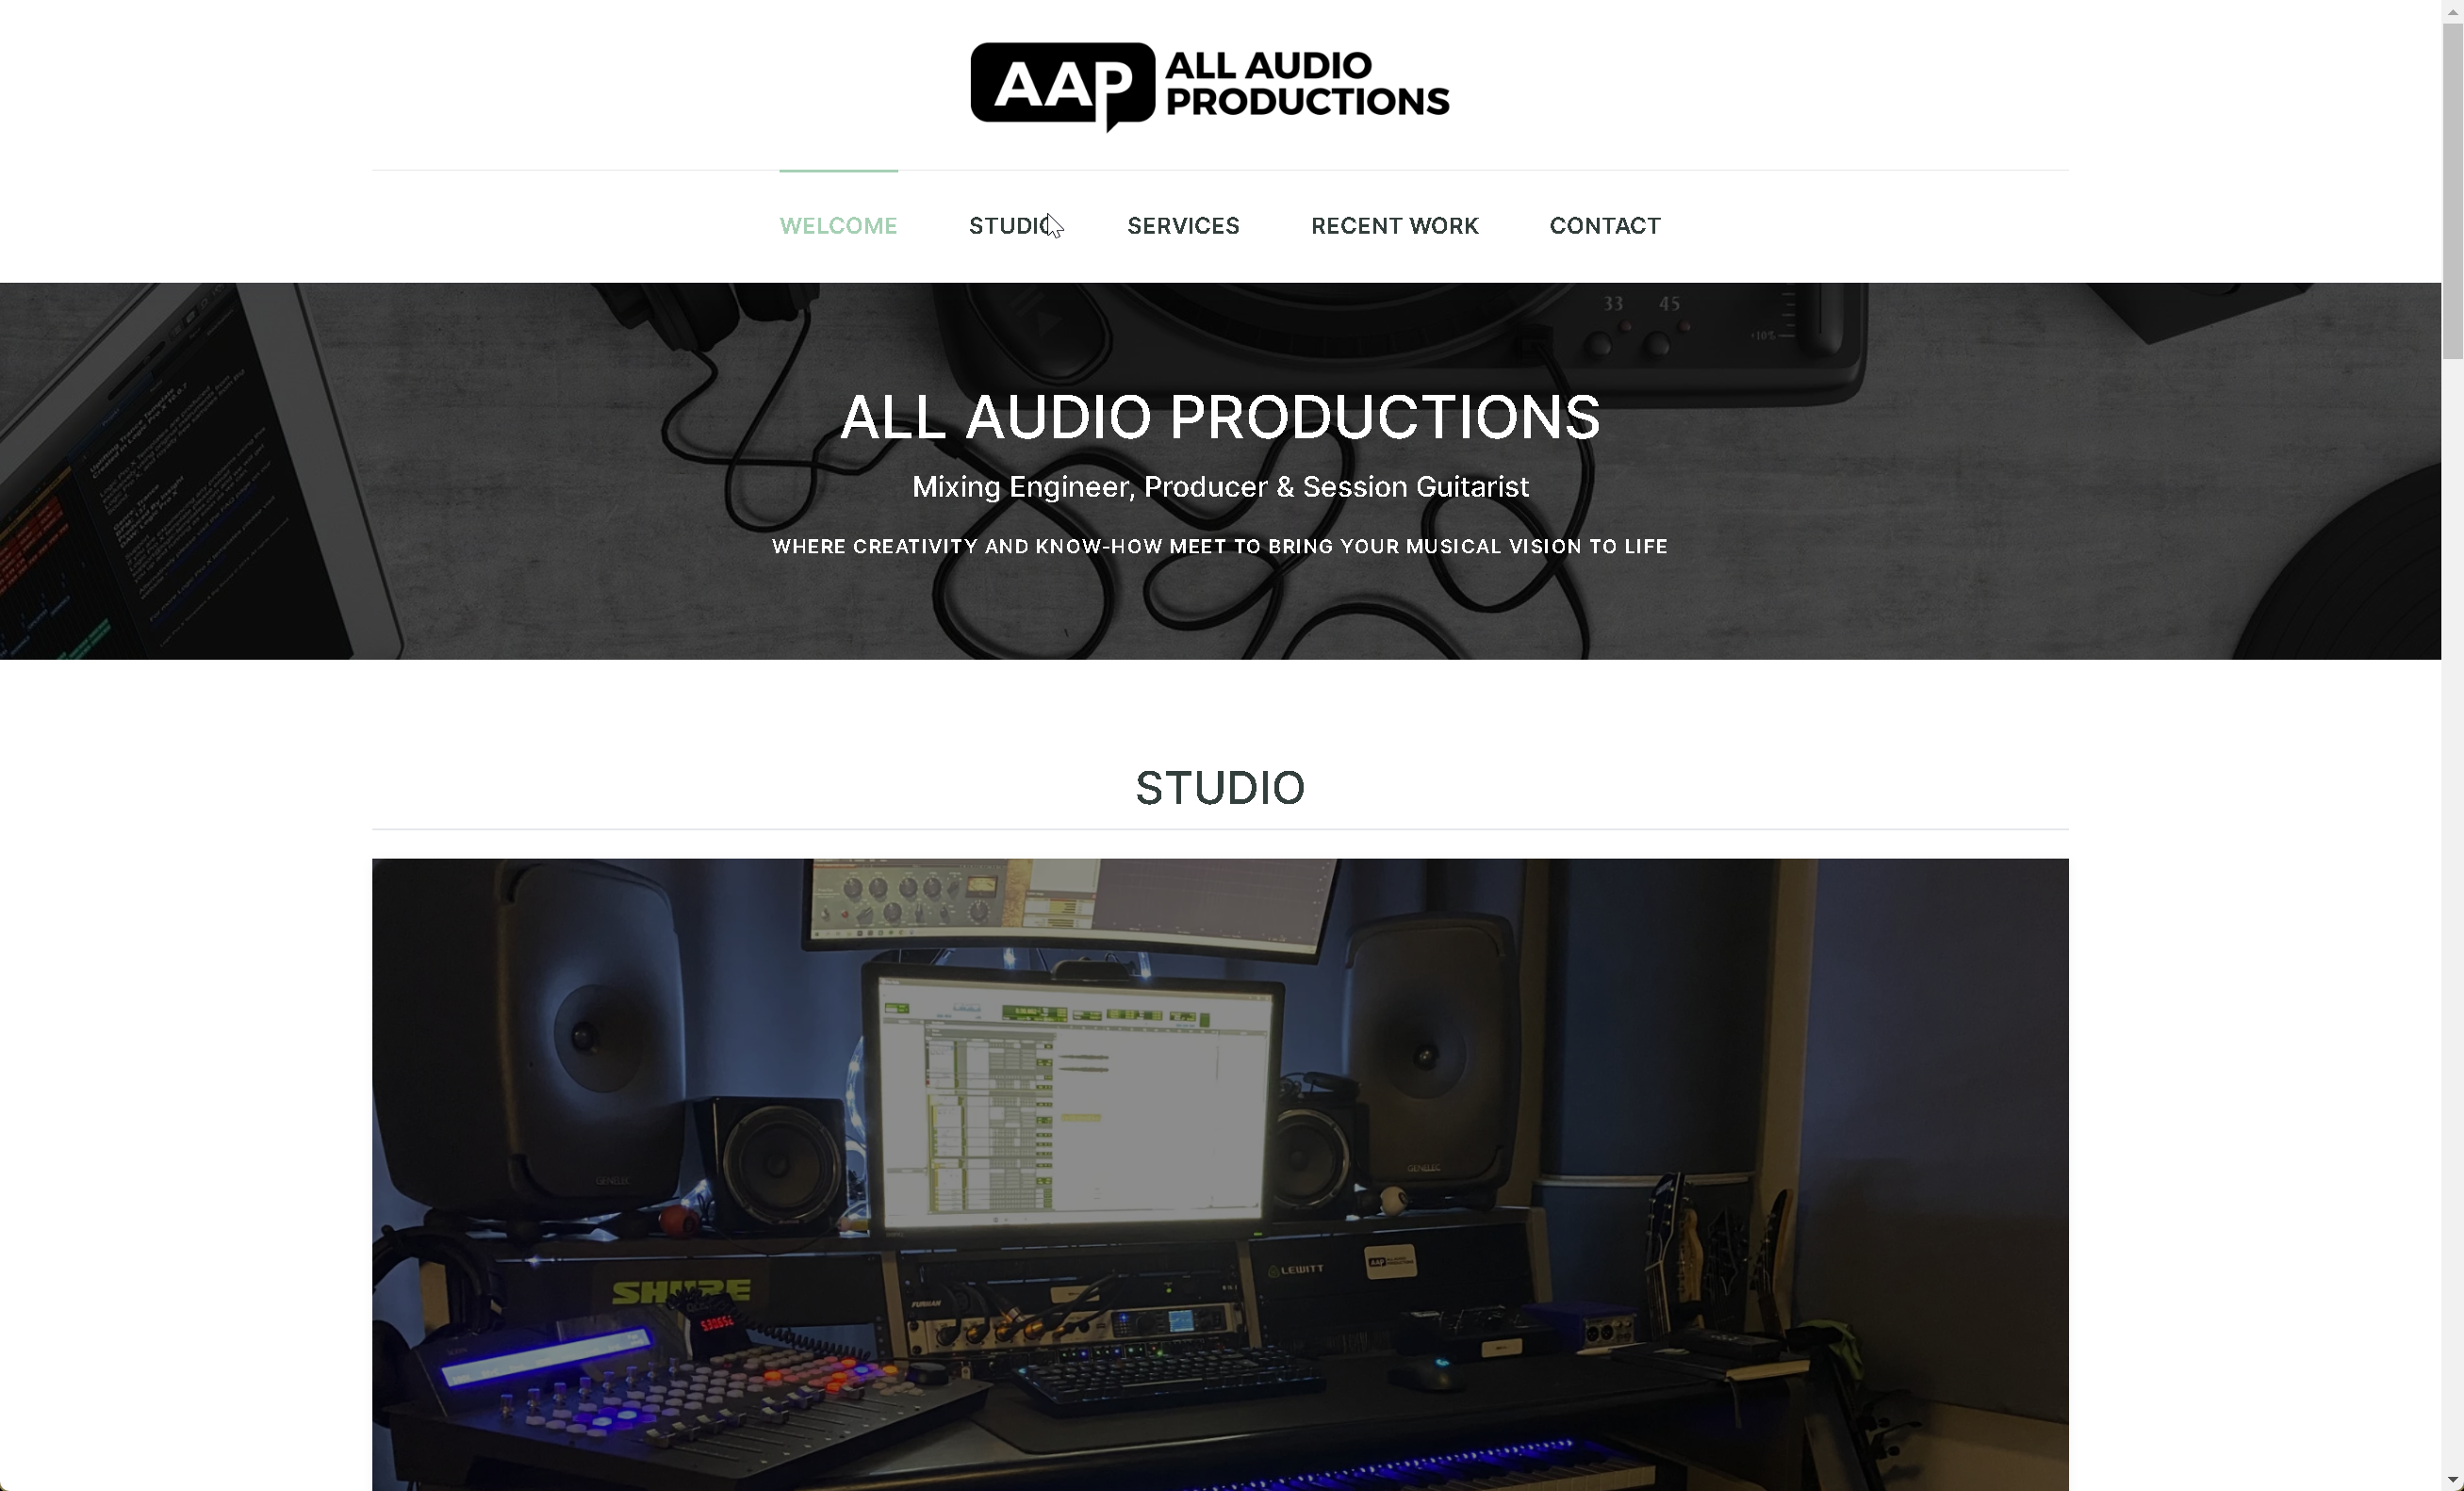 Webseite "All Audio Productions"